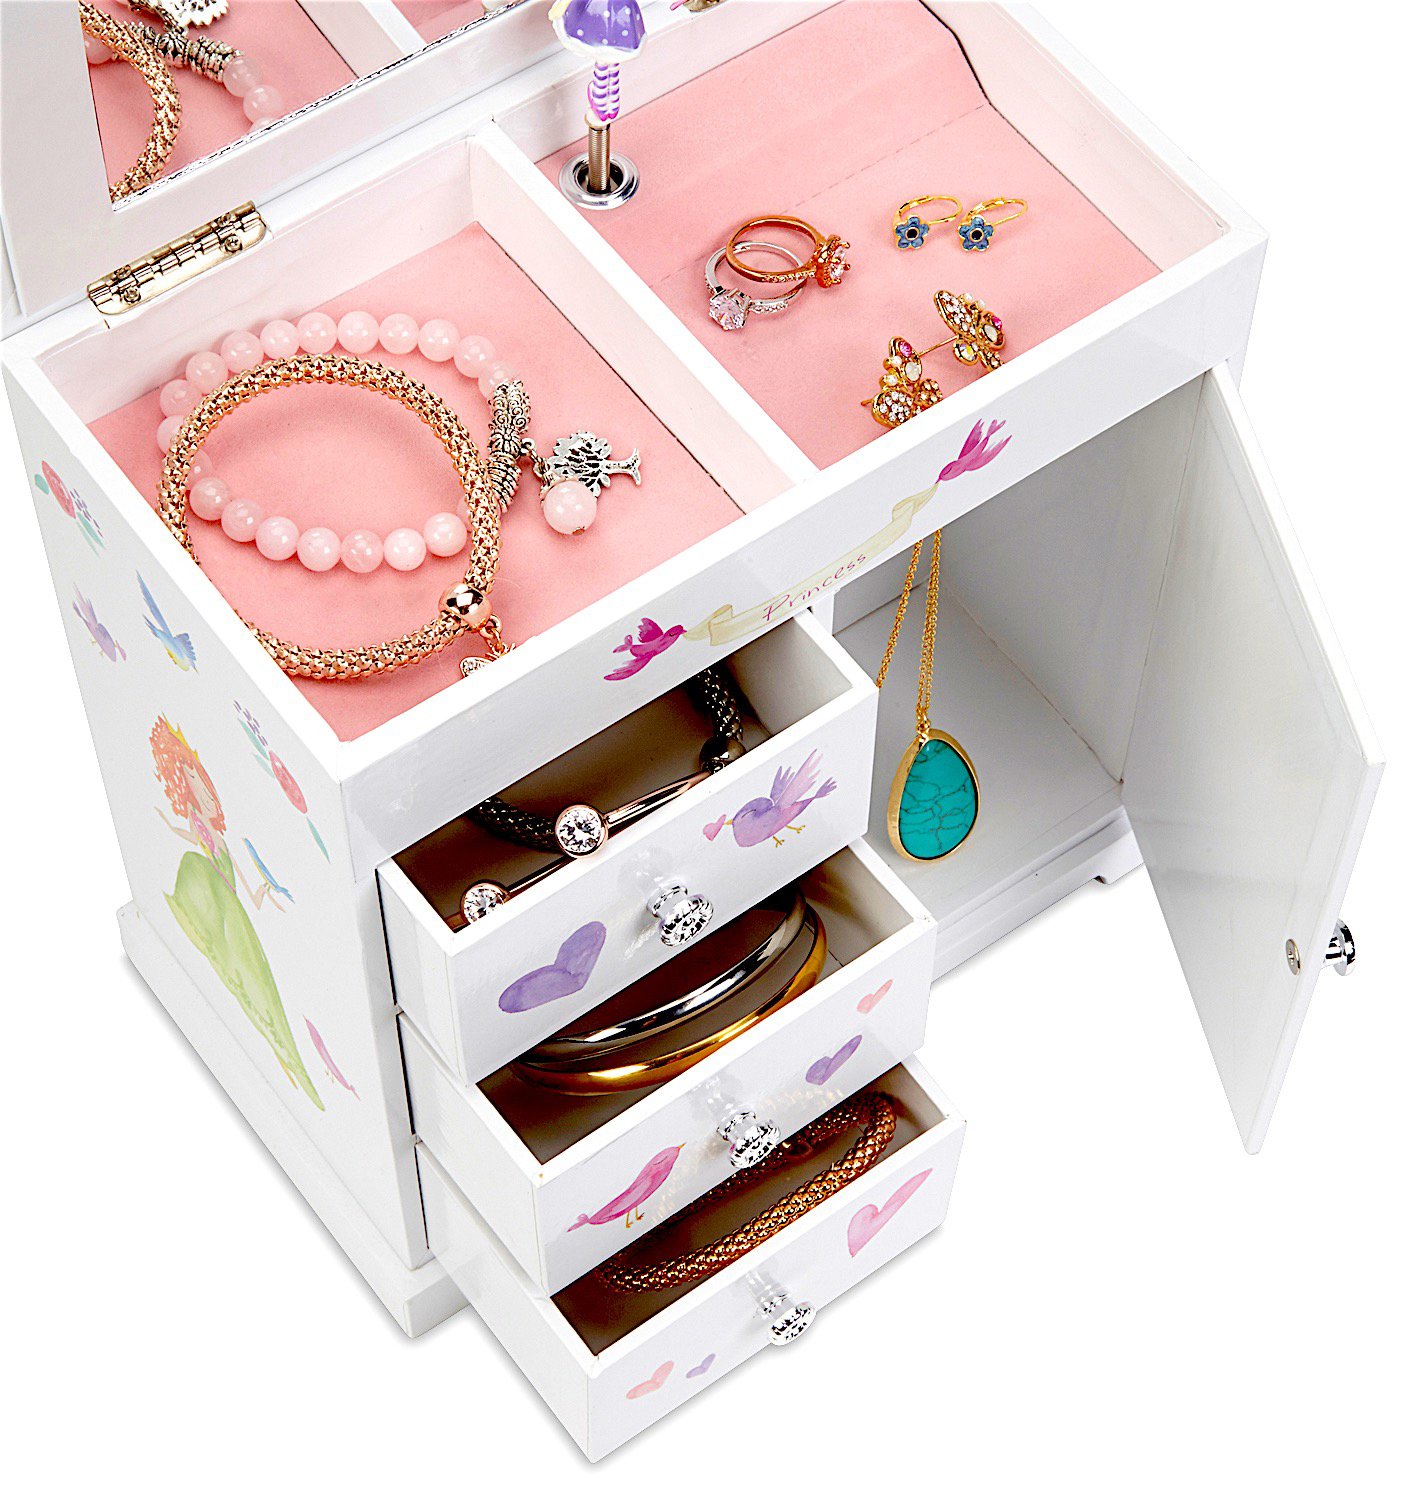 Unicorn Musical Jewelry Box with Pullout Drawers, Fairy Princess and Castle  Design, Dance of the Sugar Plum Fairy Tune